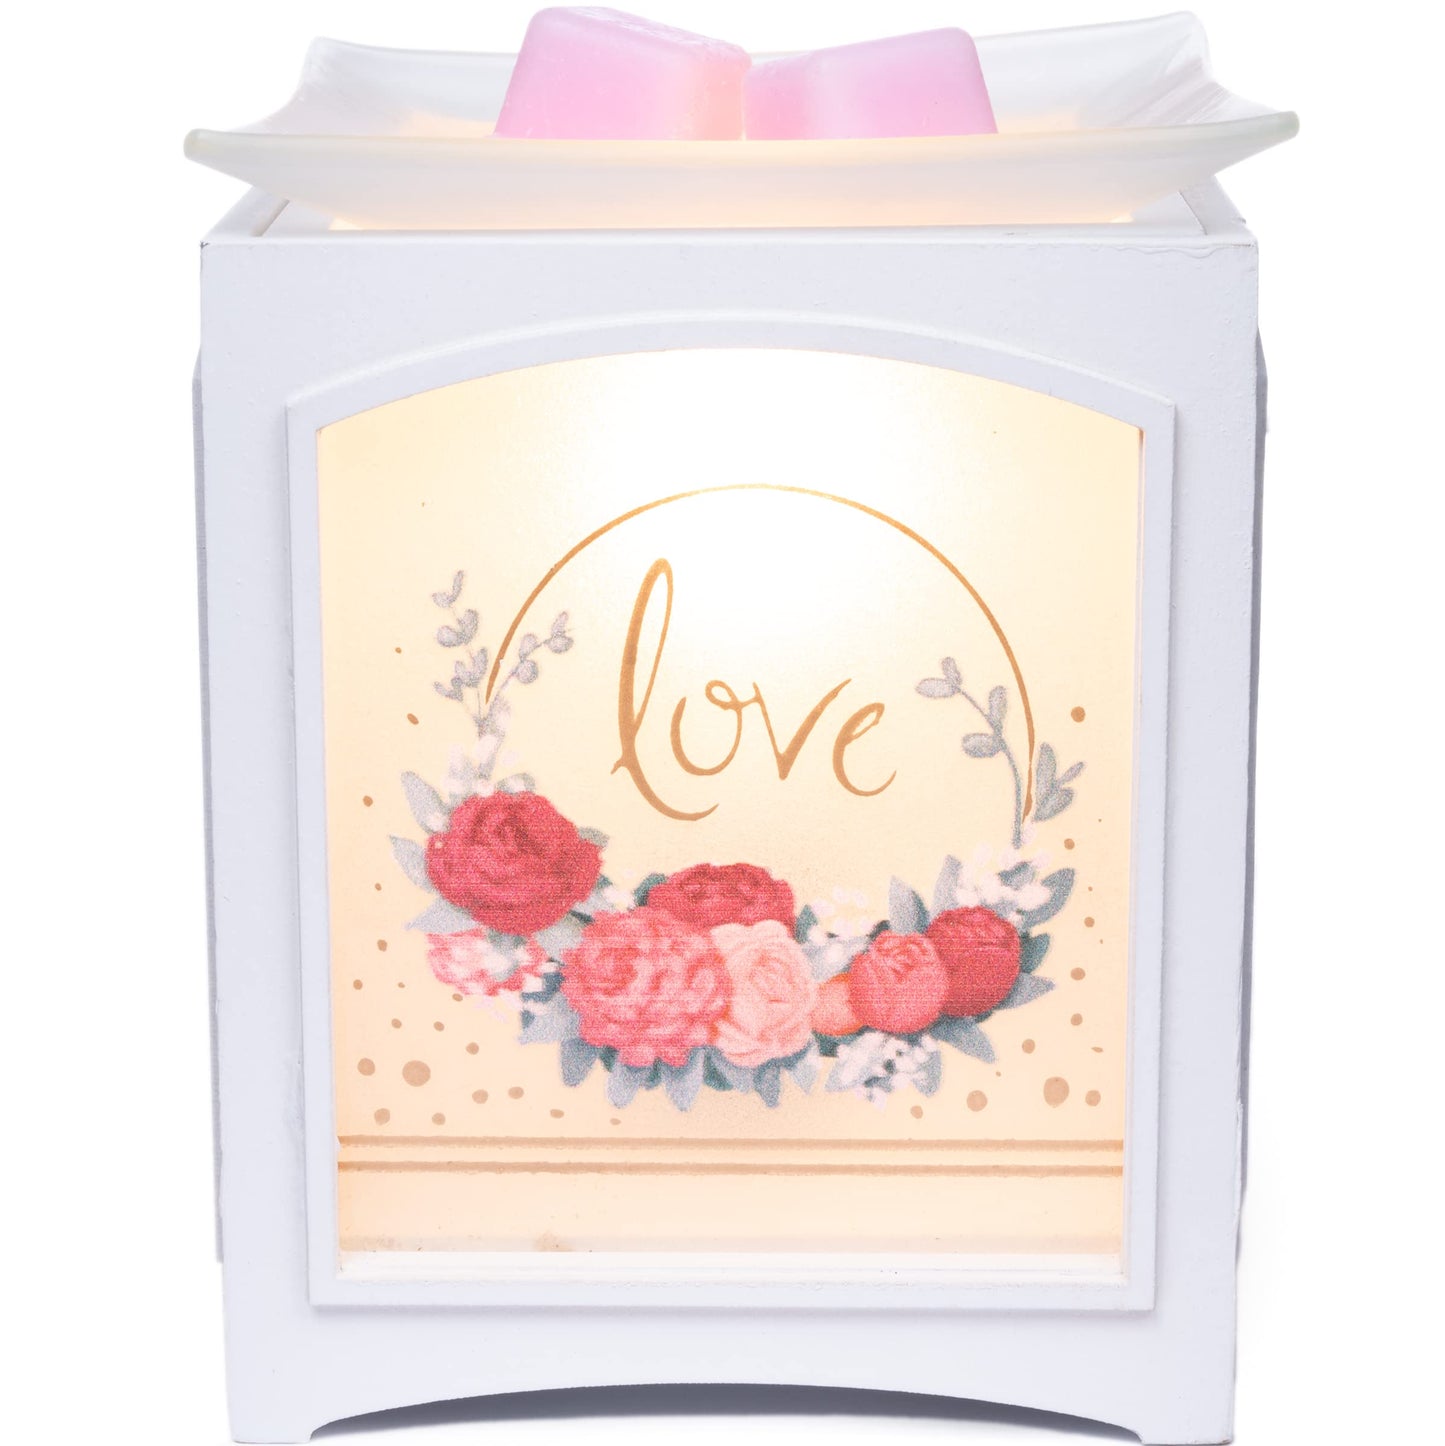 Scentsationals Romance Collection - Scented Wax Warmer - Romantic Wax Cube Melter & Burner - Electric Romance Fragrance Home Air Freshener Gift (Love Bunnies)